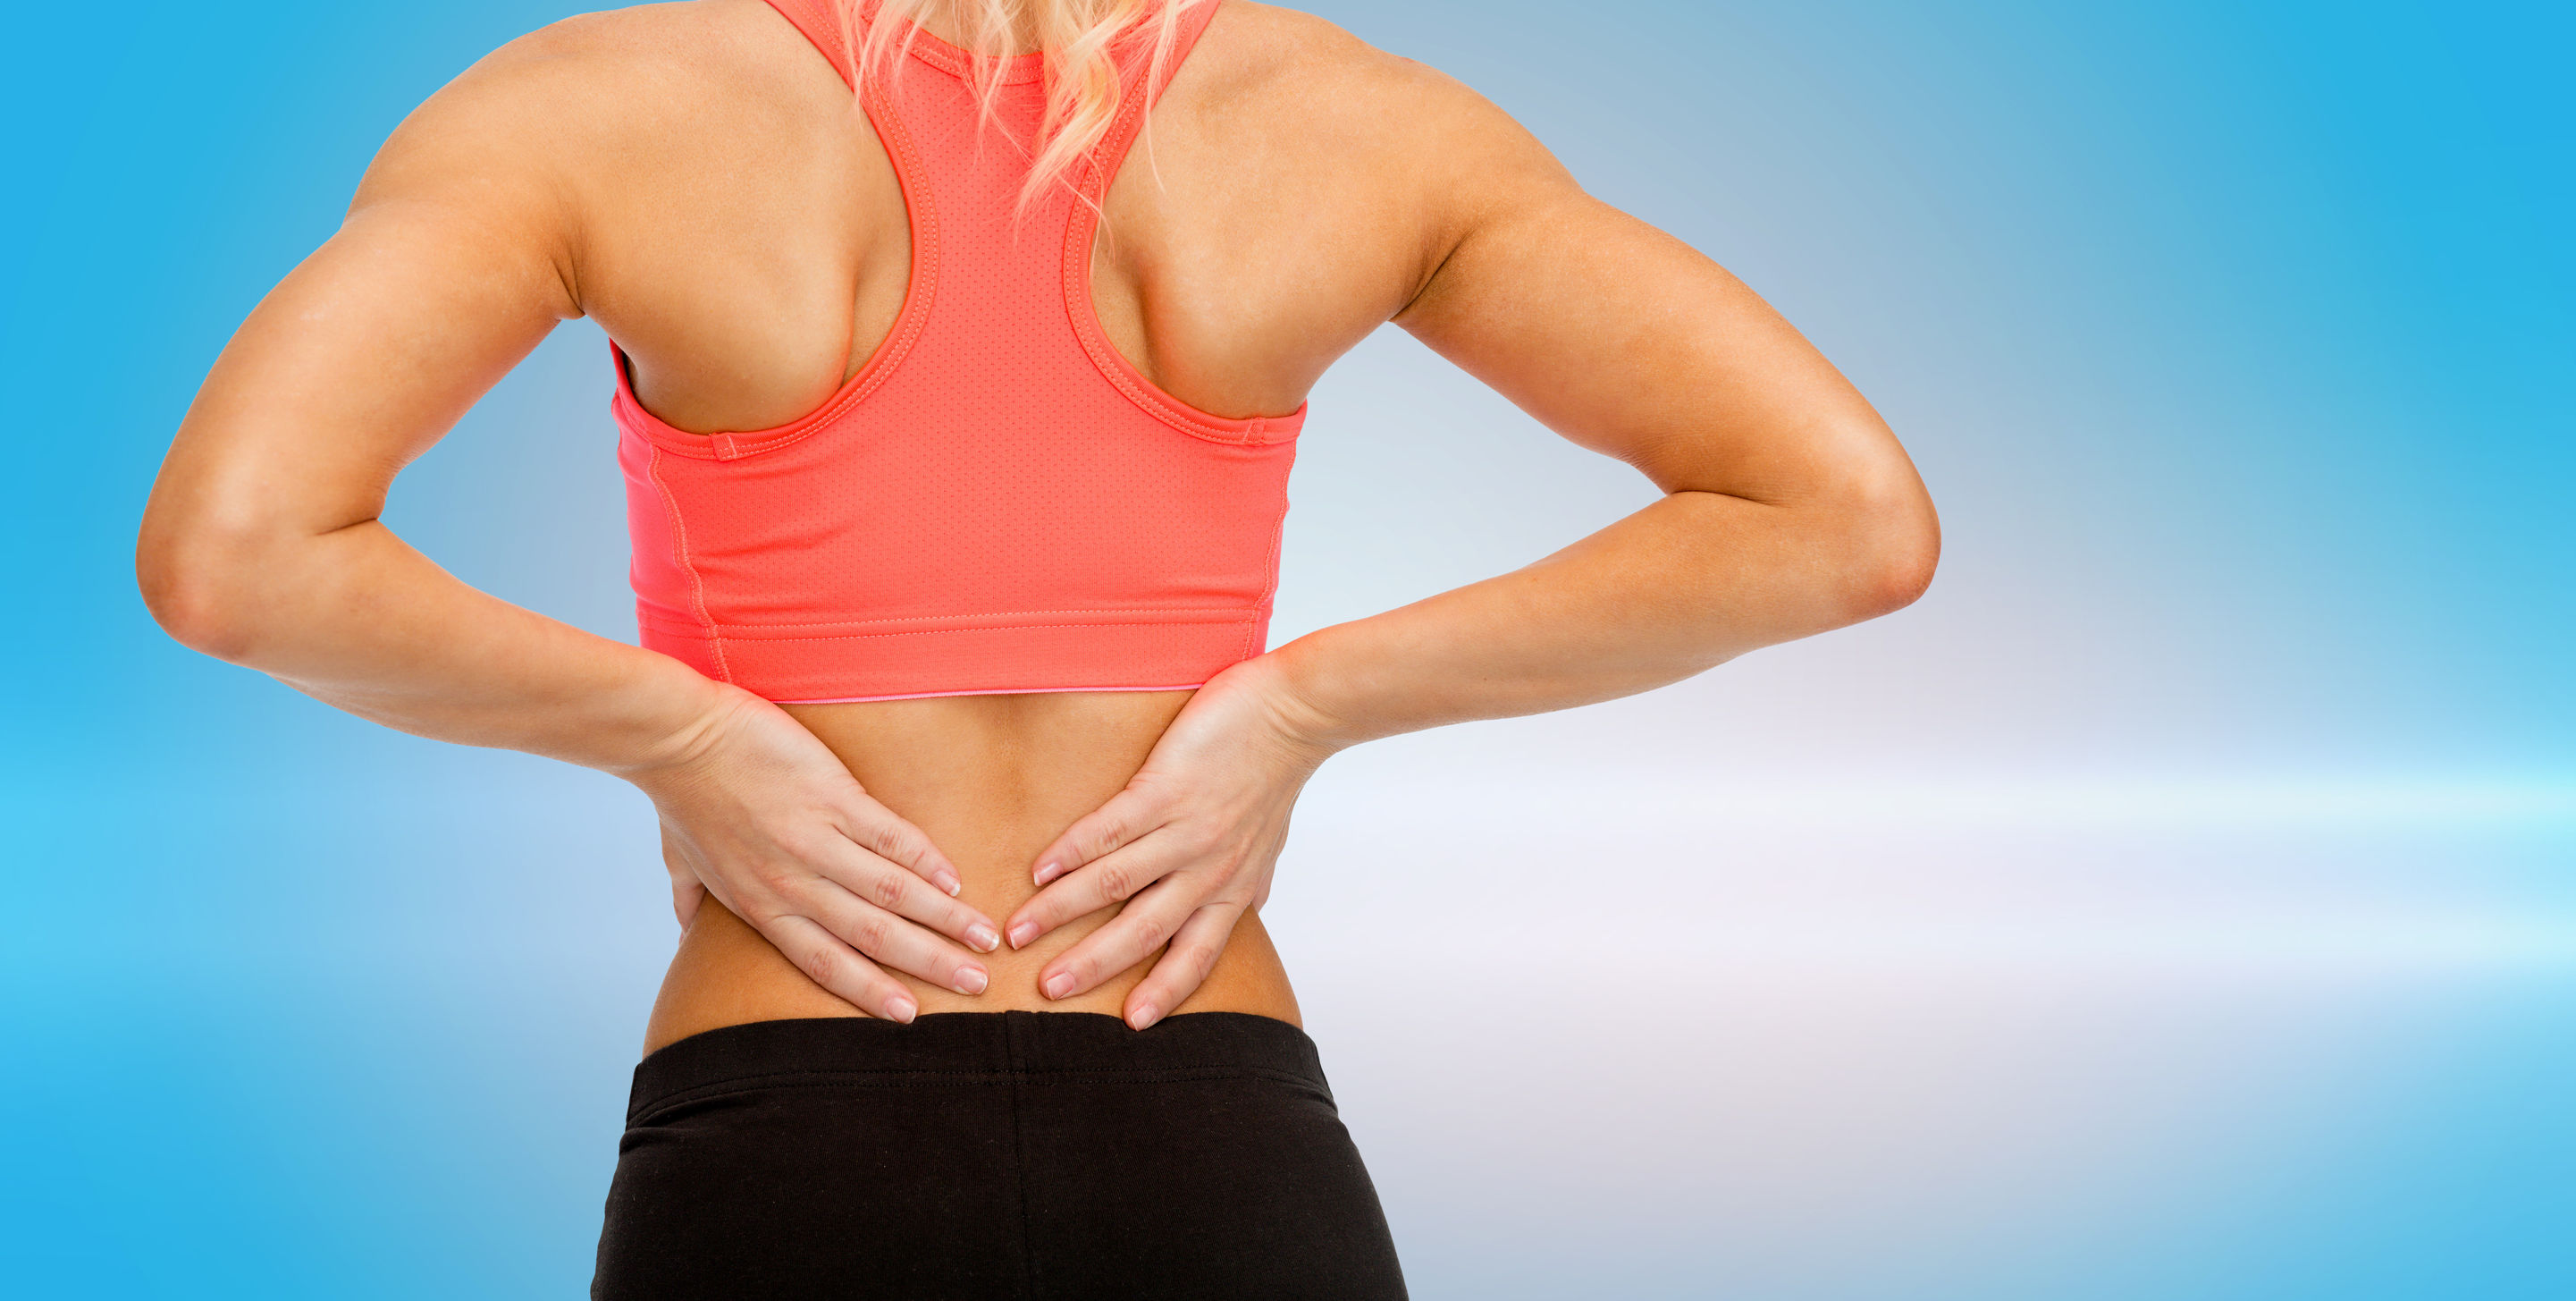 Do You Have Pain in the back? Have a look at These Tips!